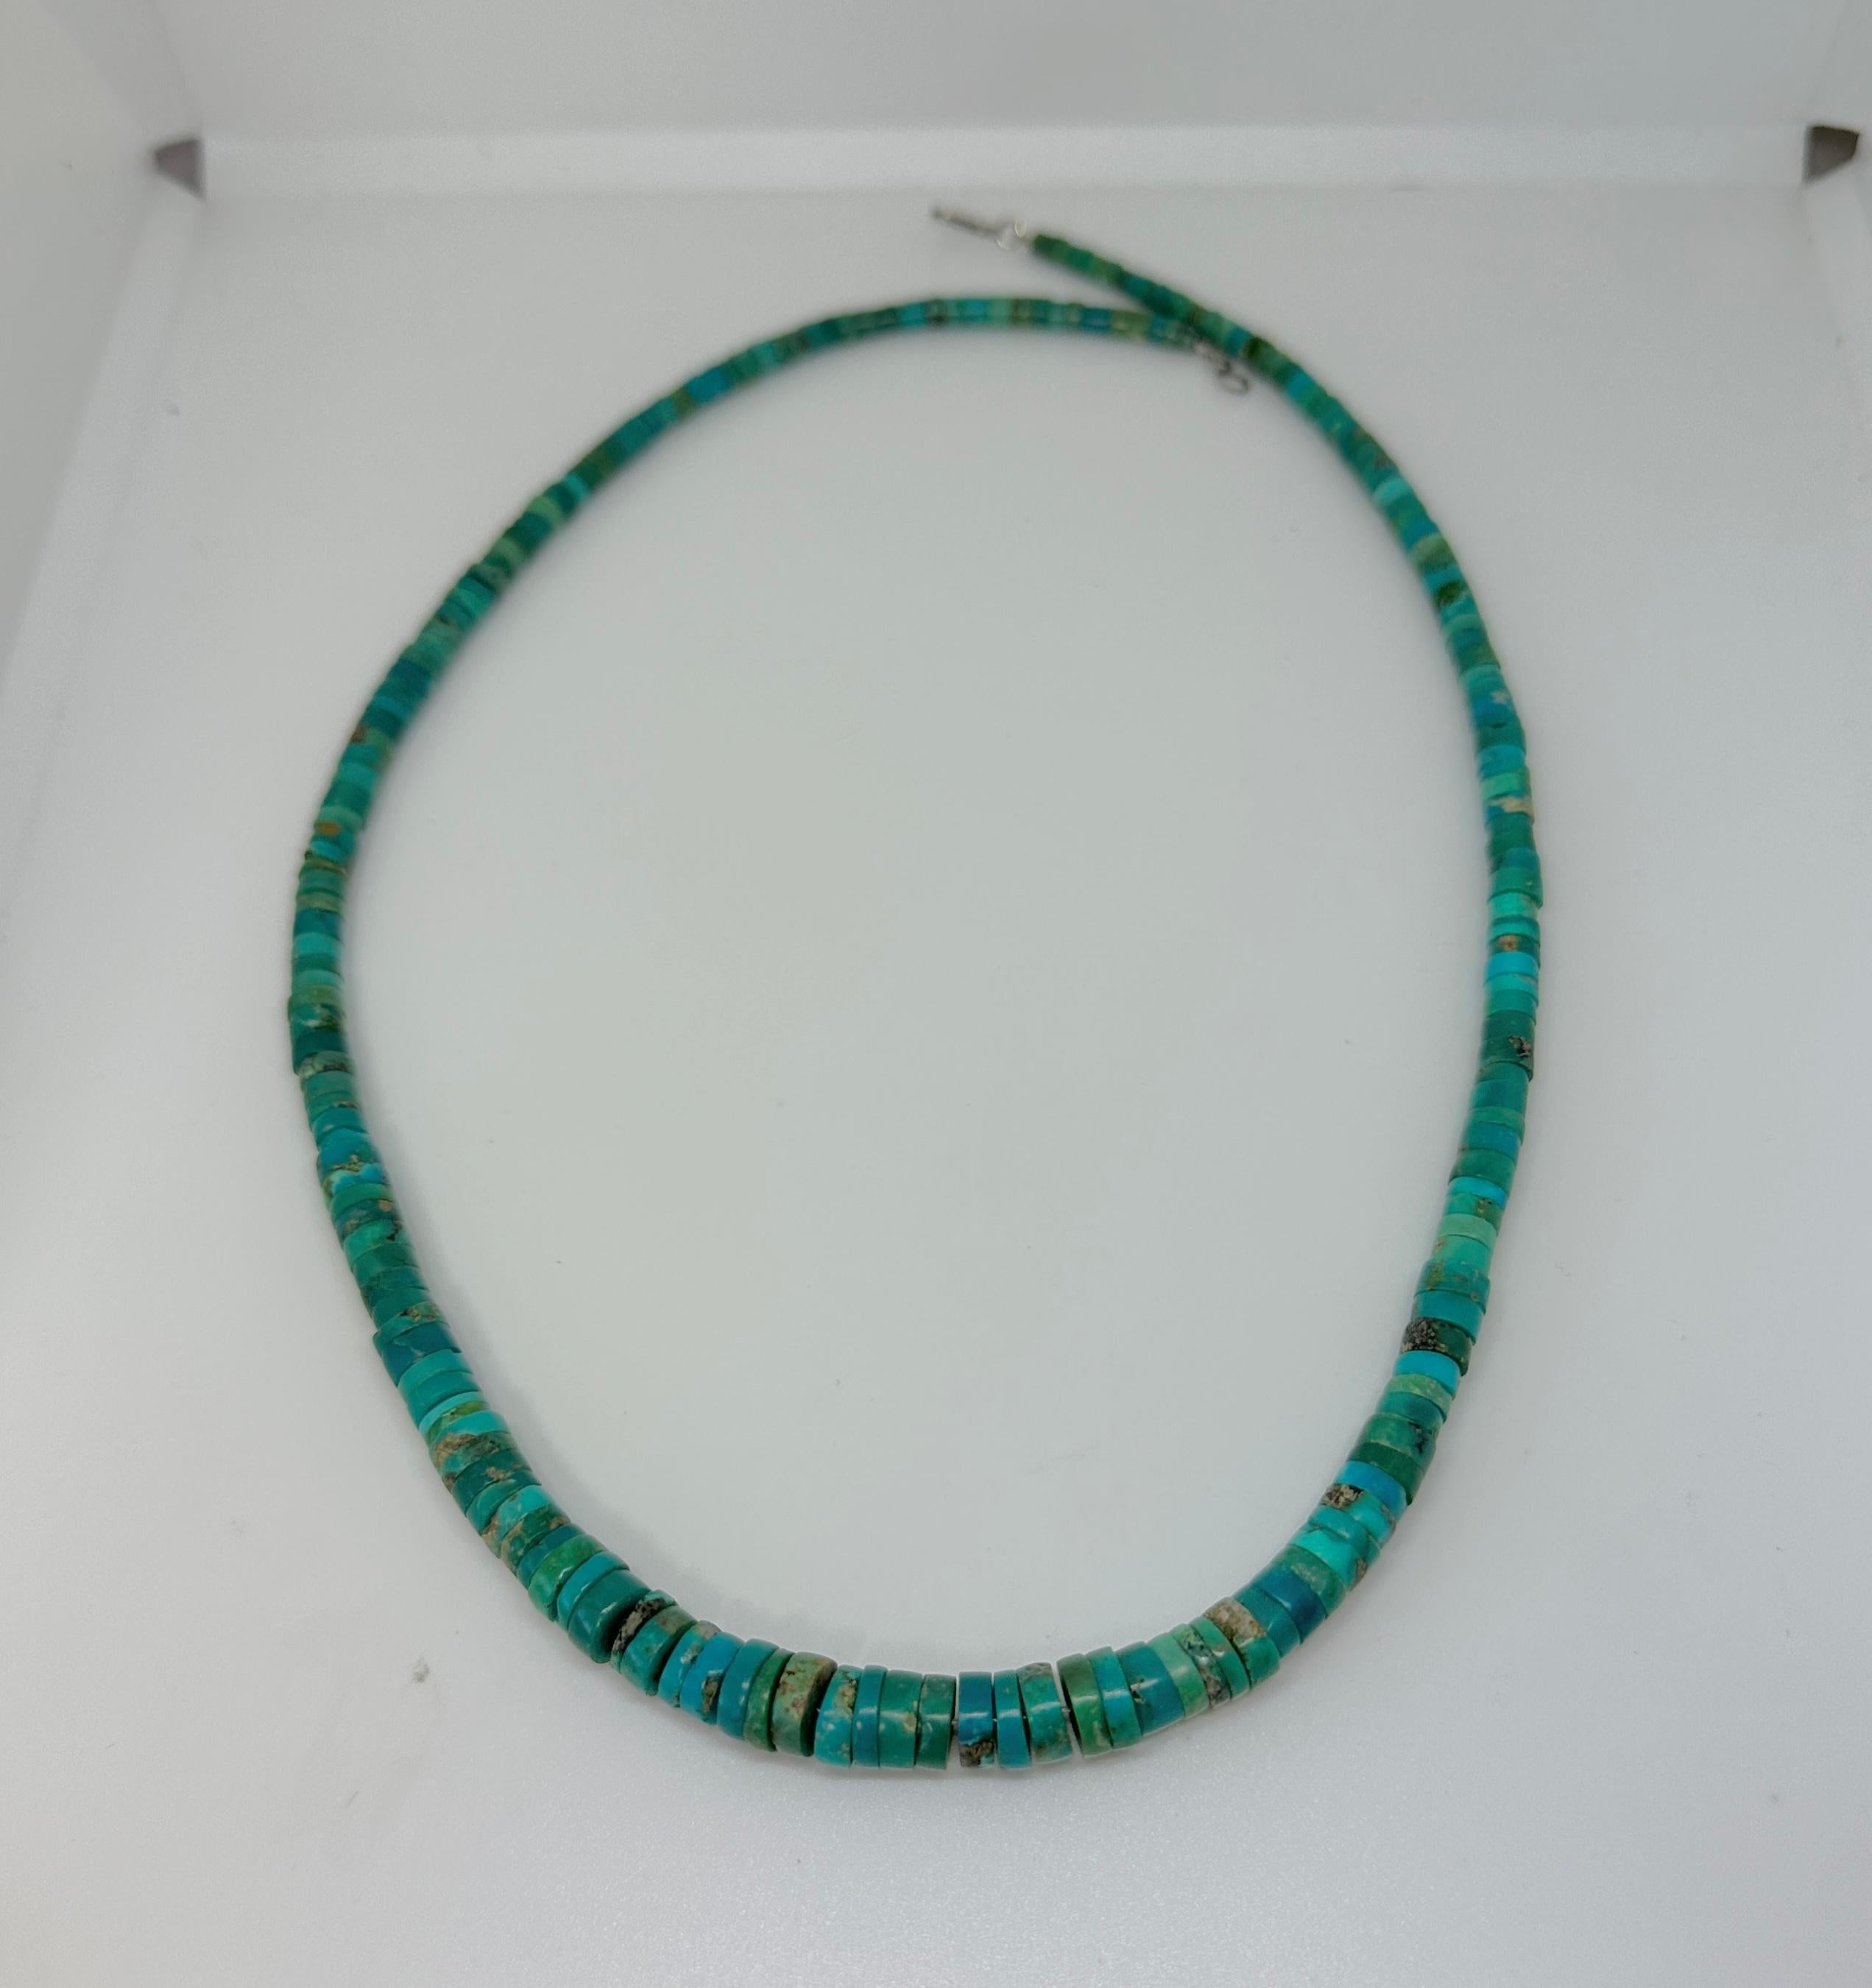 Early Santo Domingo Pueblo Greasy Caribbean Blue Green Heishi Turquoise Necklace For Sale 1